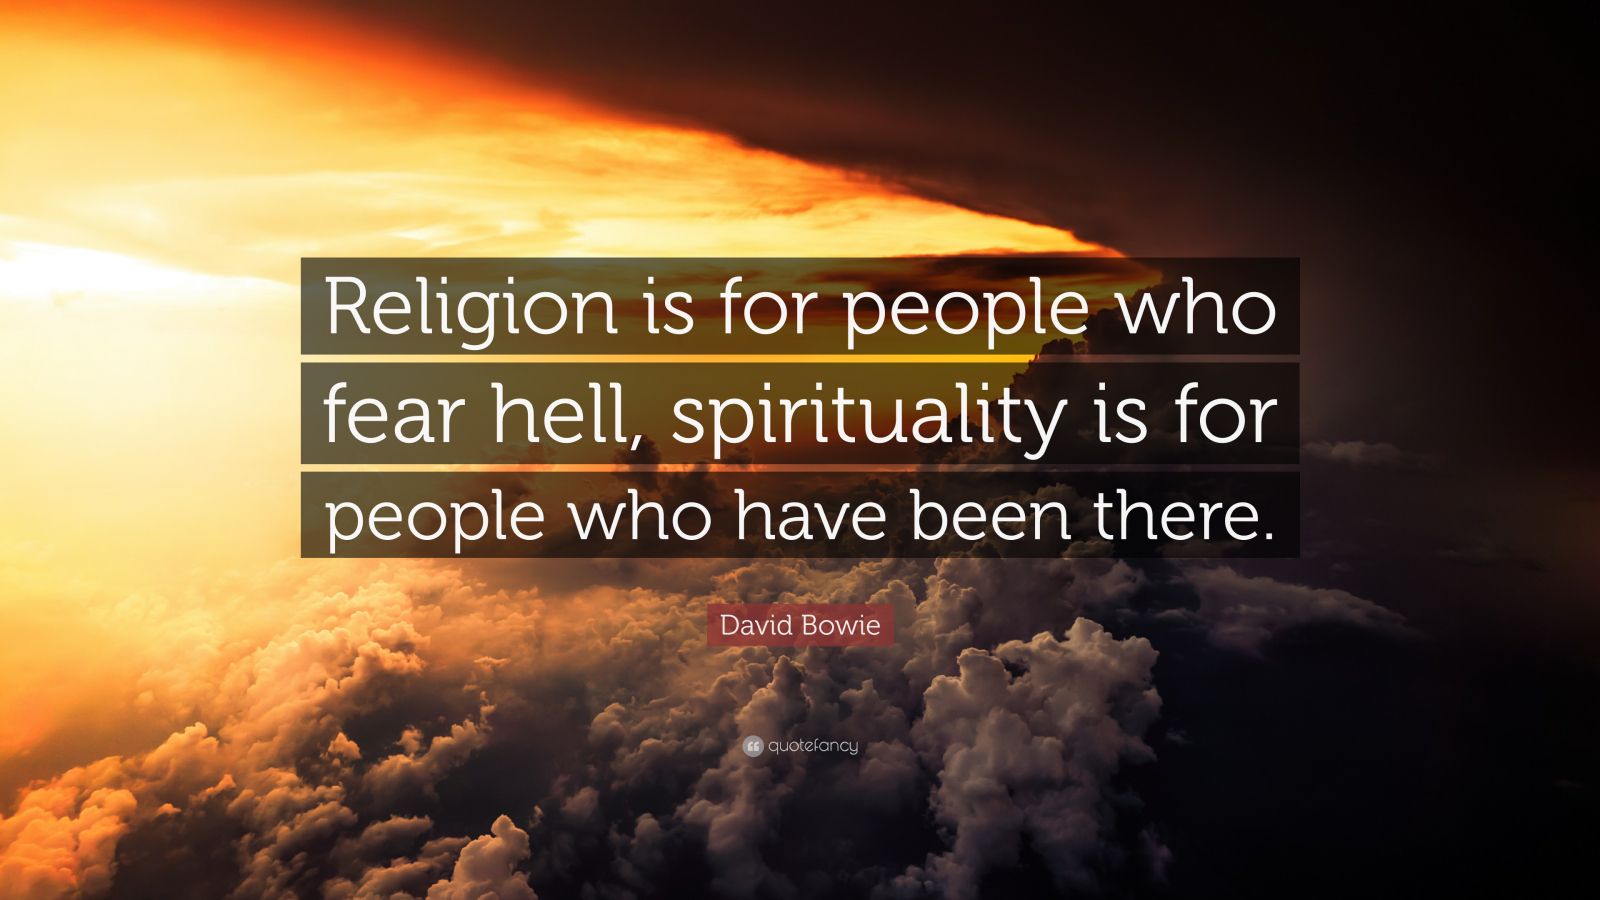 David Bowie Quote: “Religion is for people who fear hell, spirituality ...